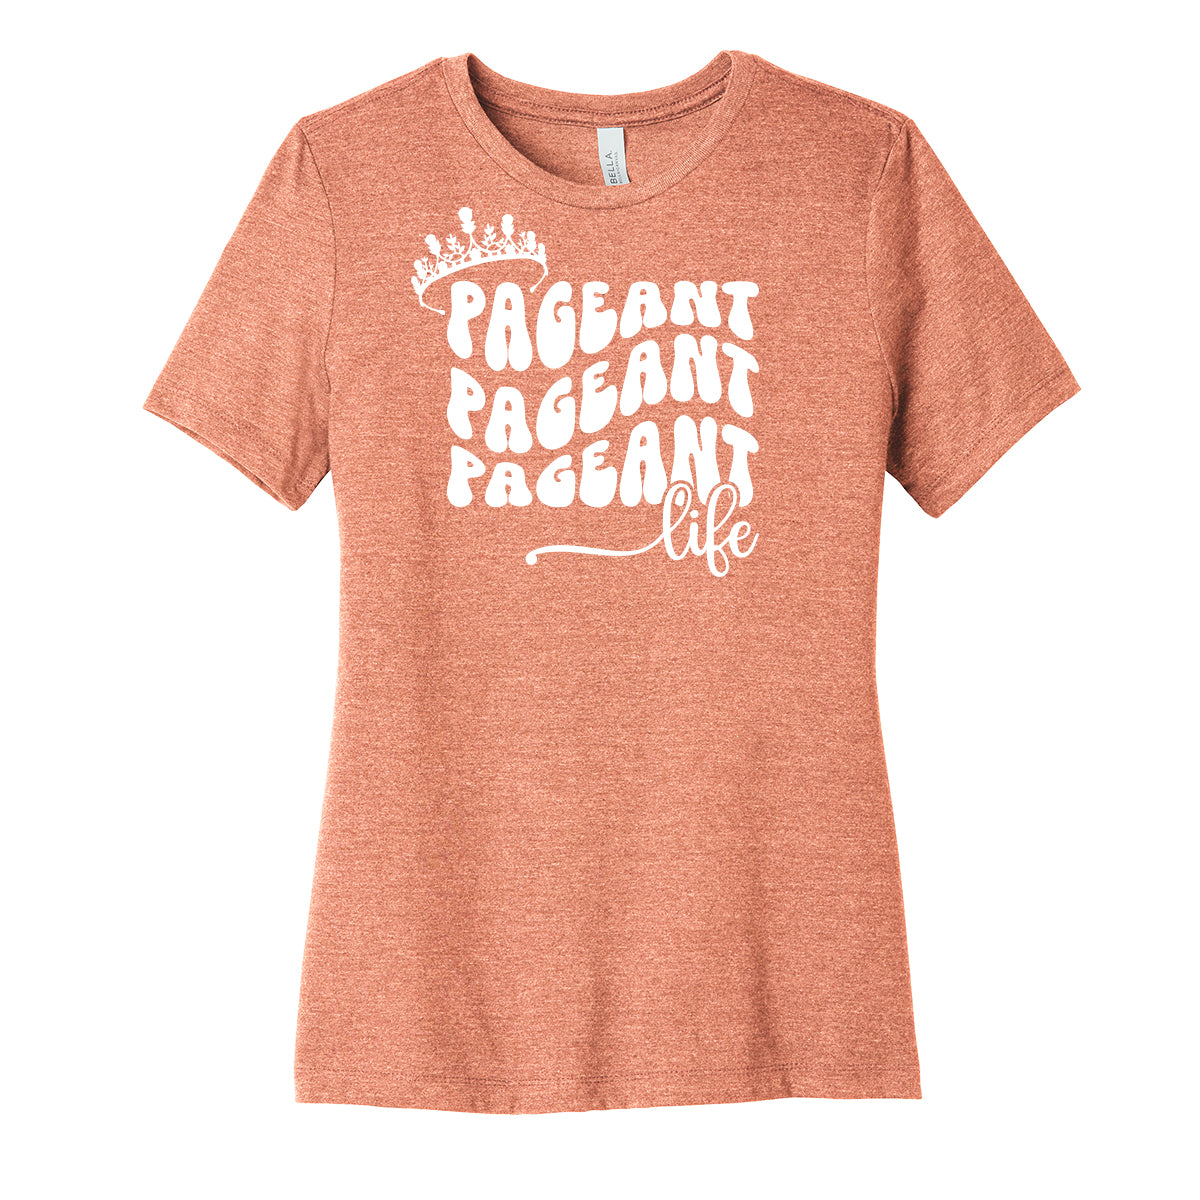 Pageant Life Womens Fit Tee